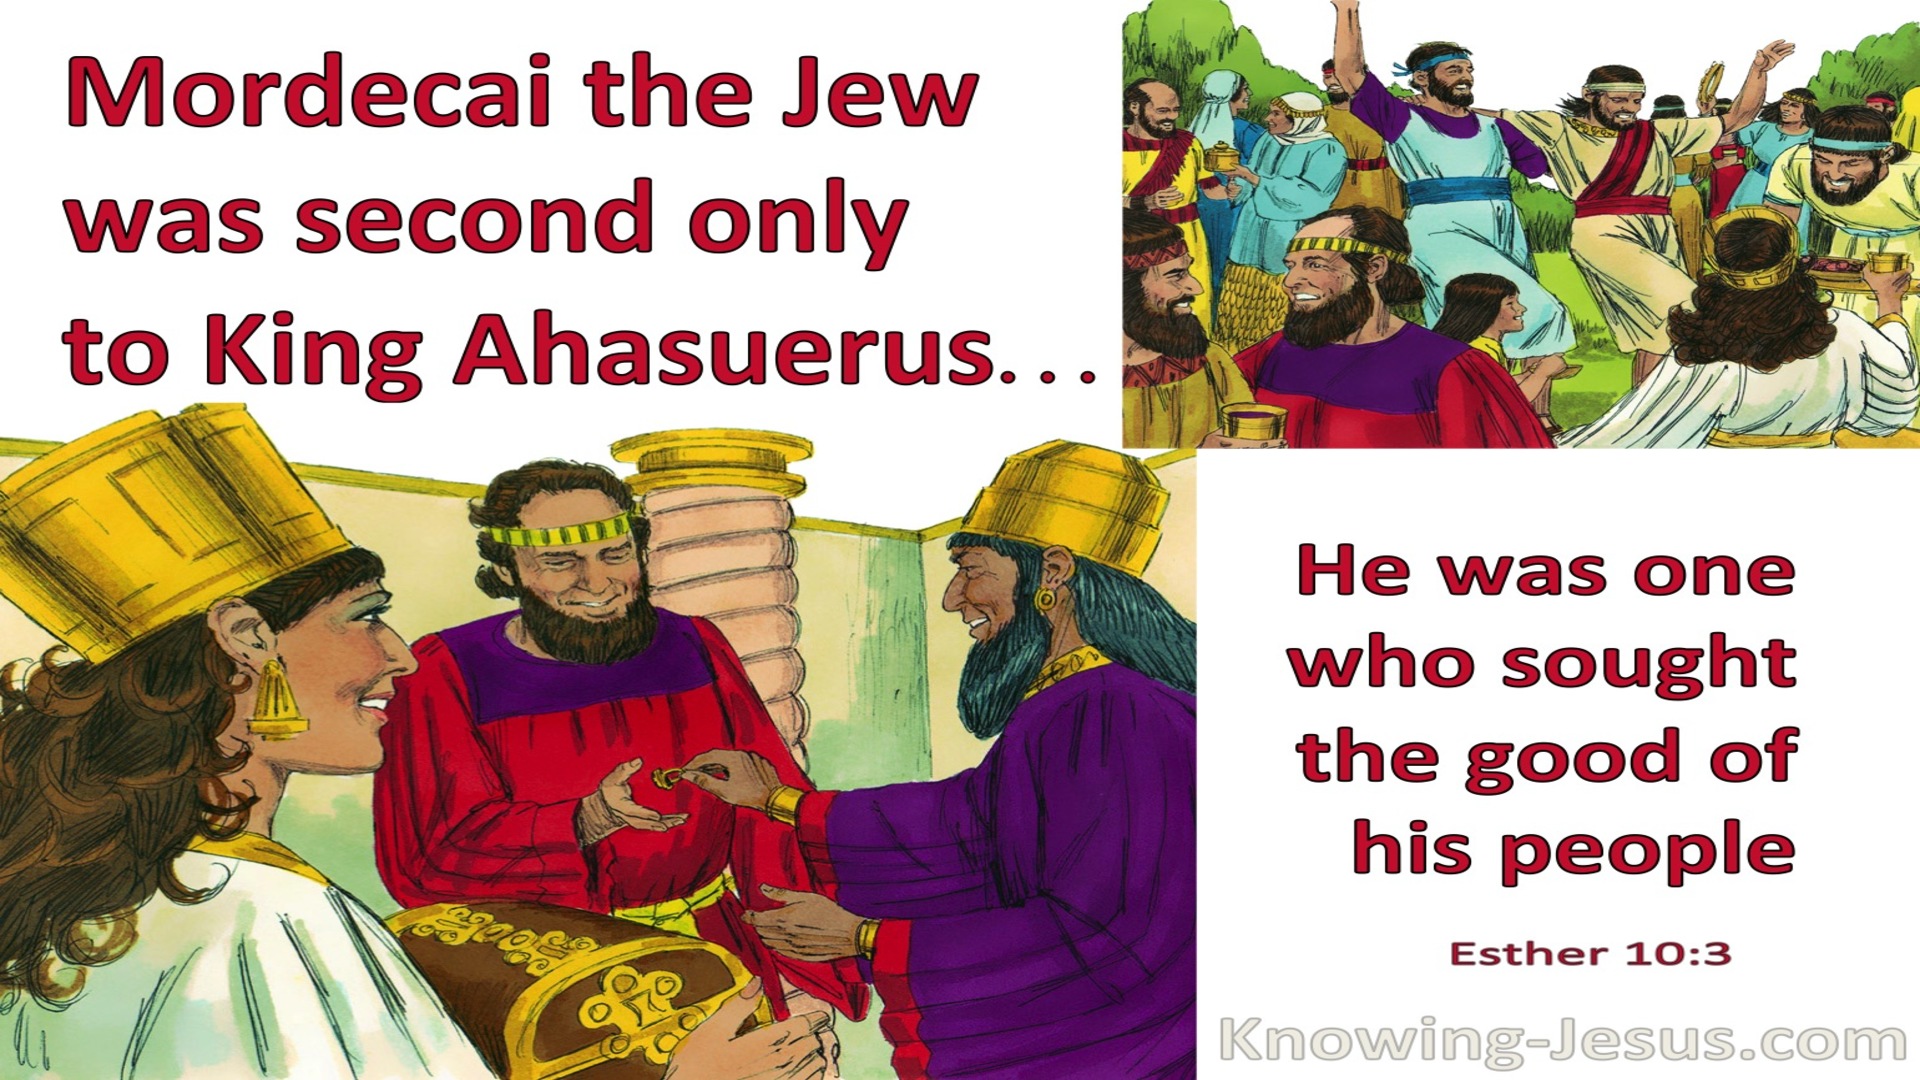 Esther 10:3 Mordecai was second only to King Ahasuerus (red)